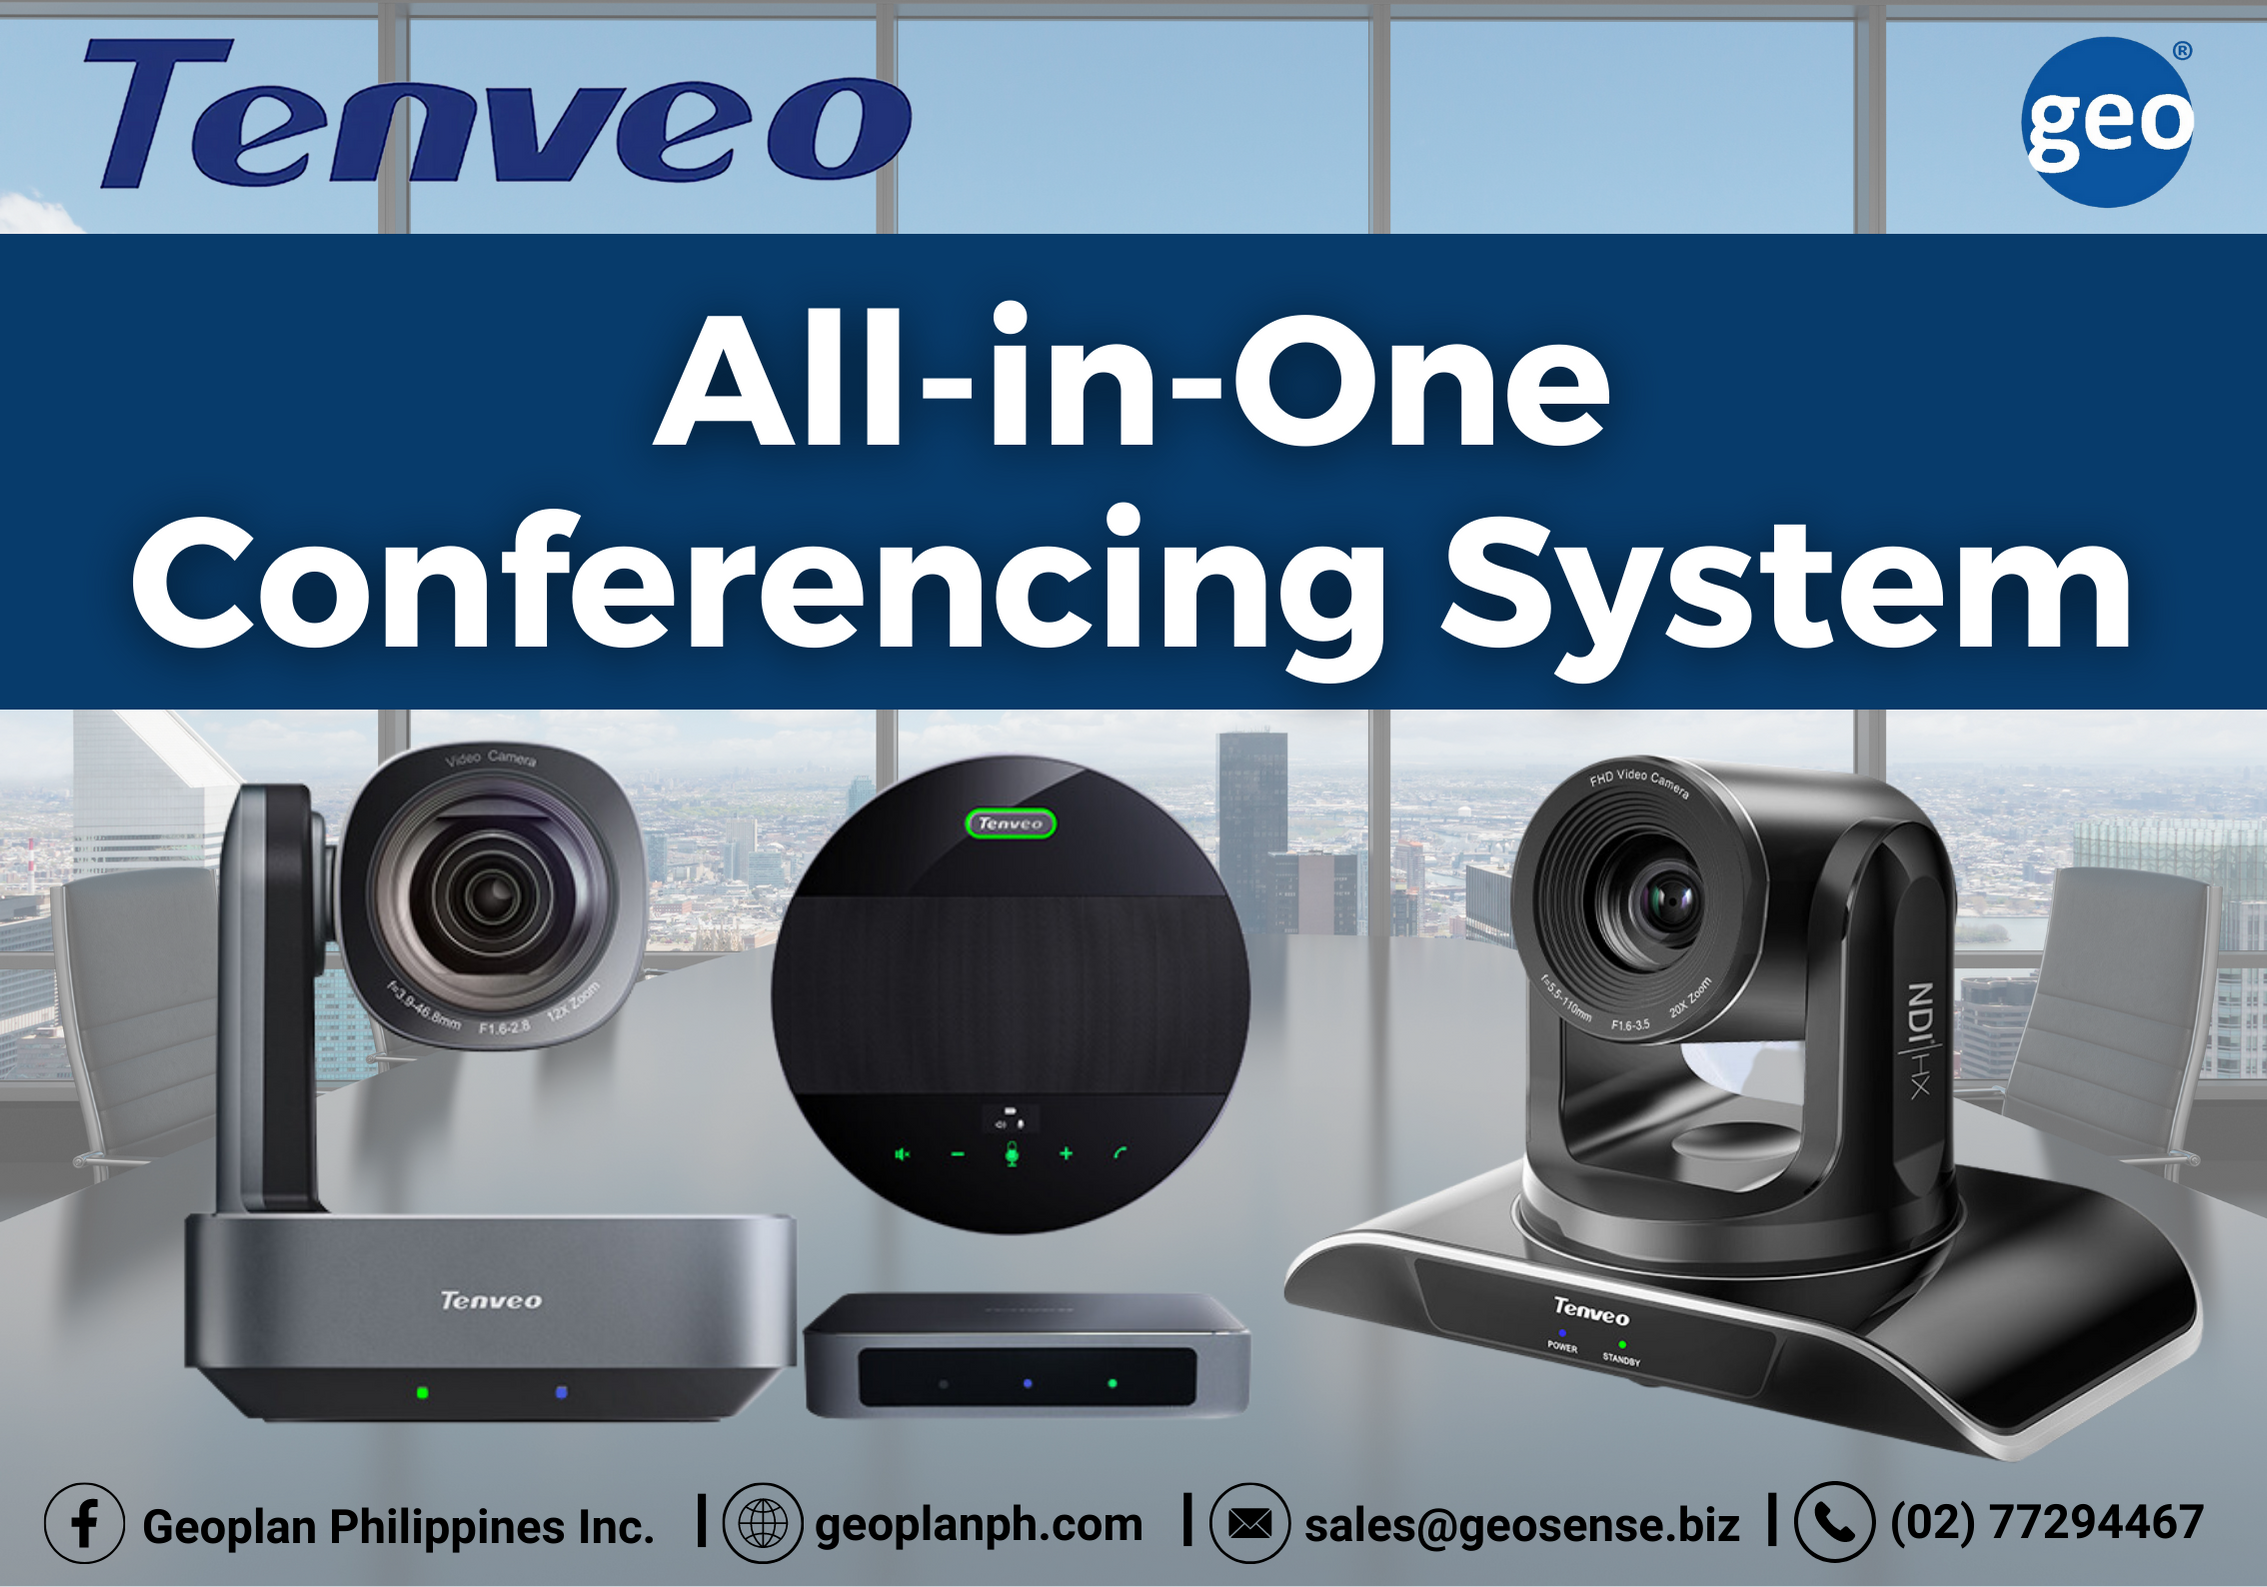 Tenveo: The All-in-One Conferencing System You Need